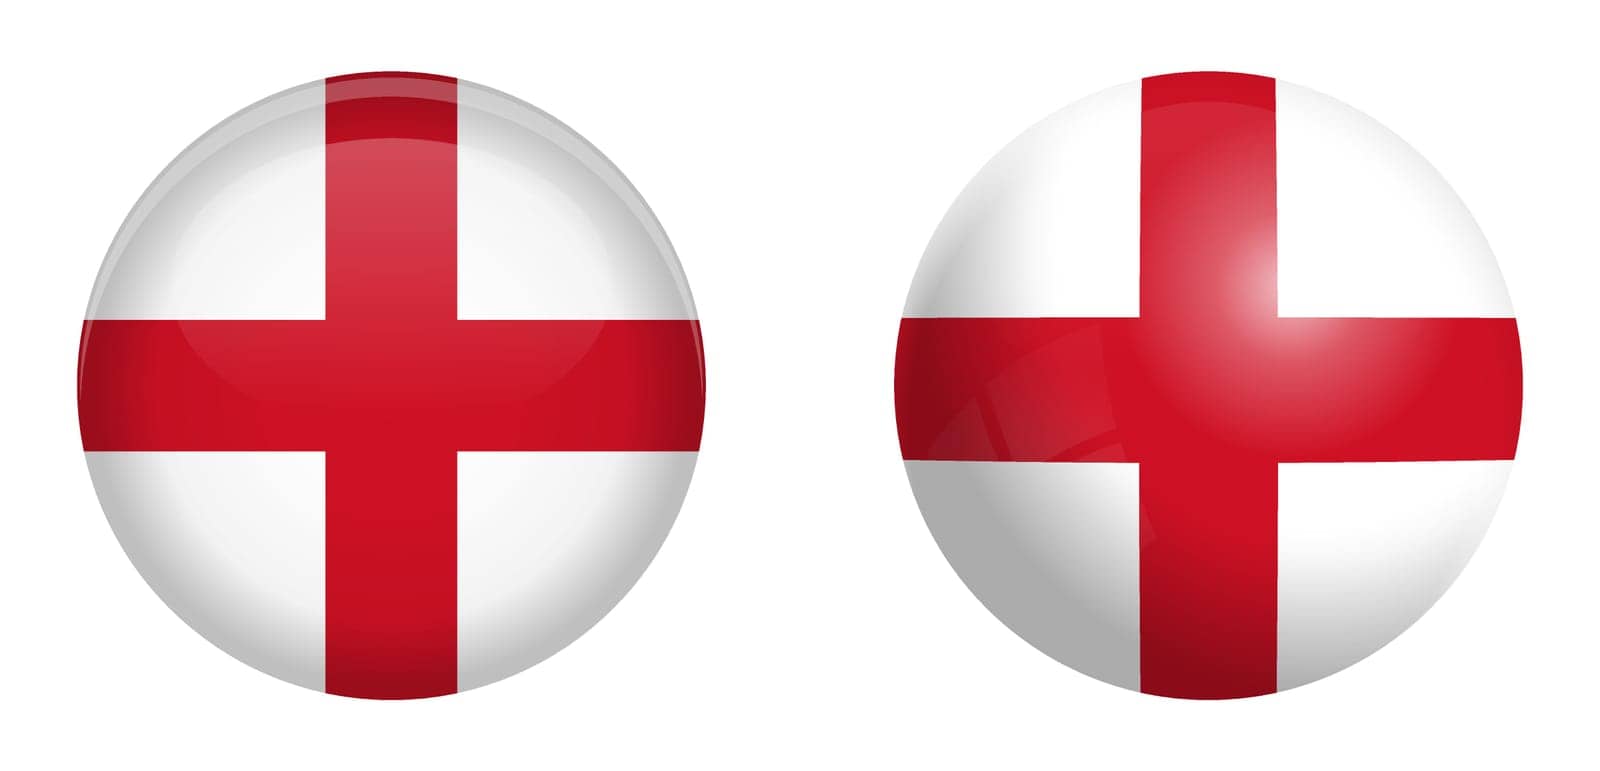 England flag under 3d dome button and on glossy sphere / ball. by Ivanko